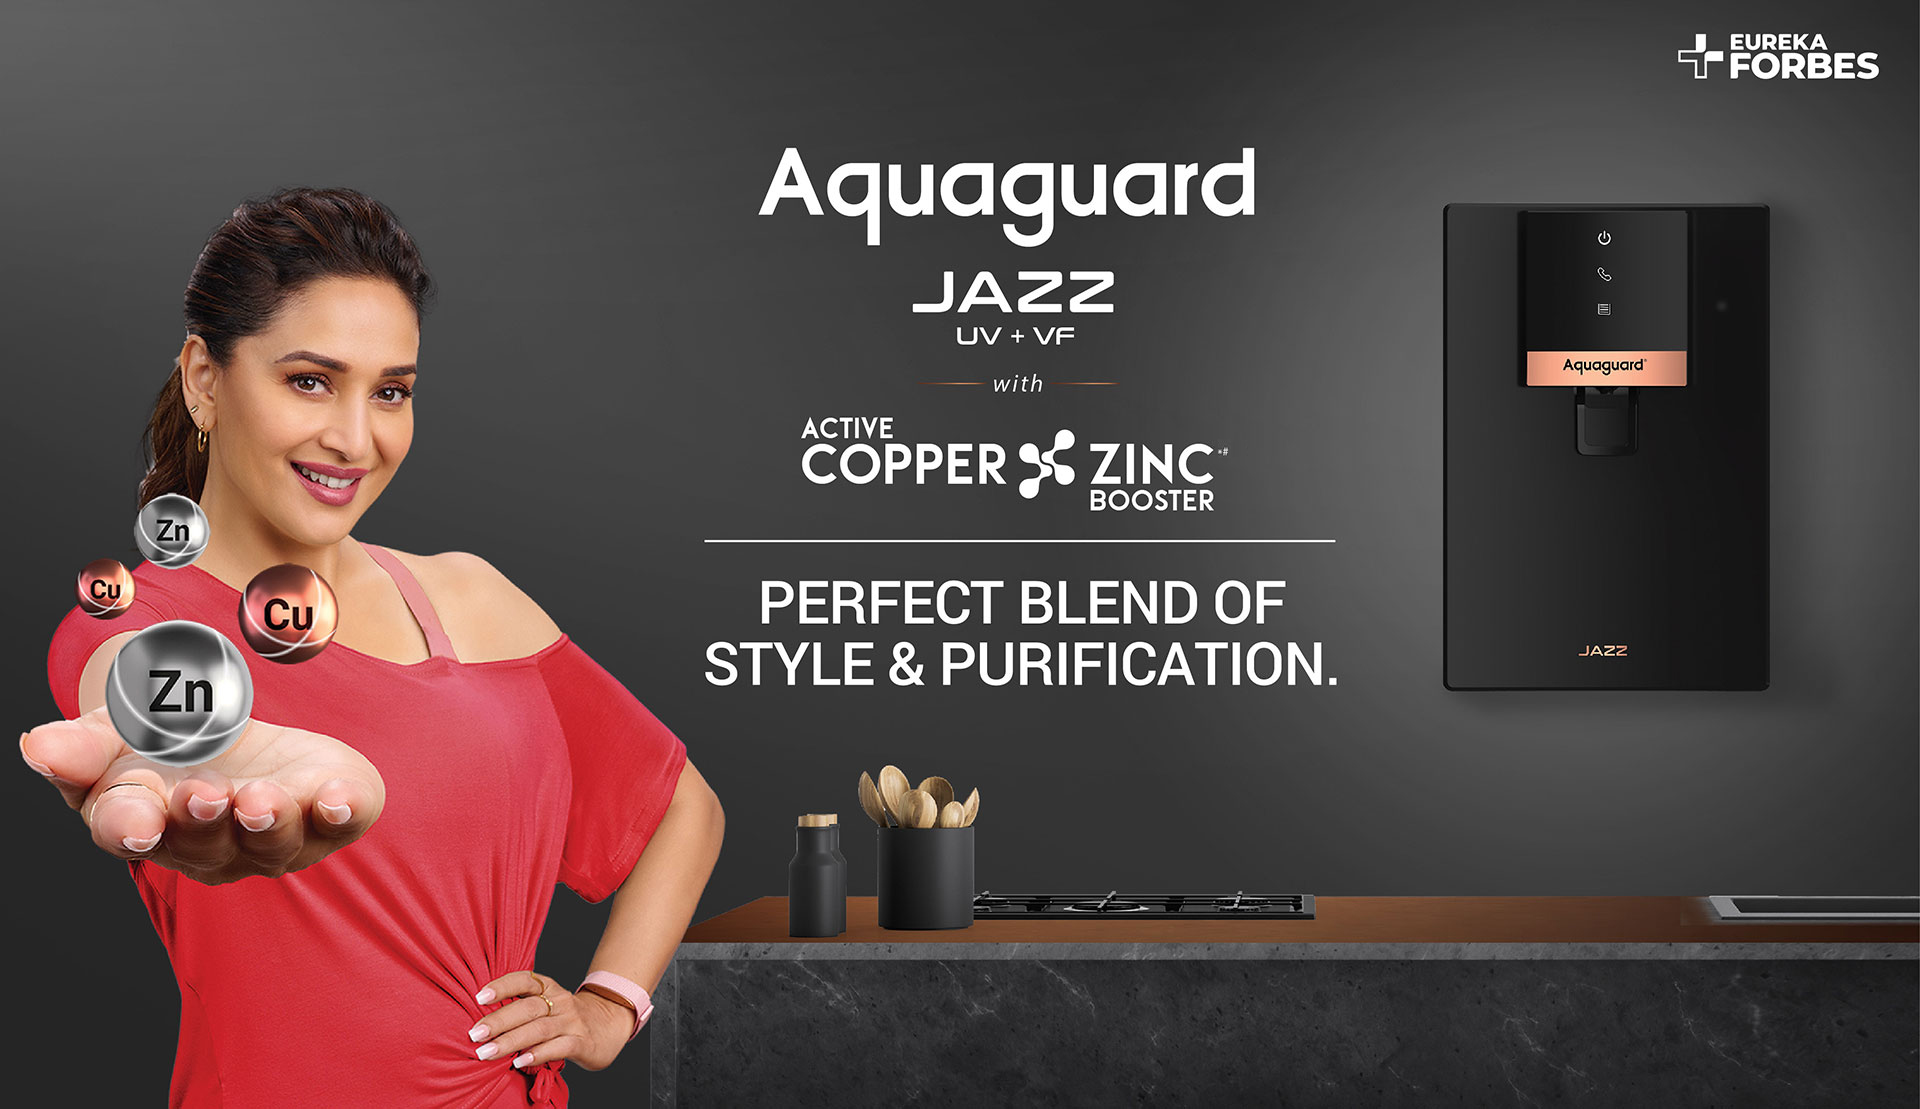 Aquaguard JAZZ UV + UF with Active Copper PERFECT BLEND OF STYLE & PURIFICATION.